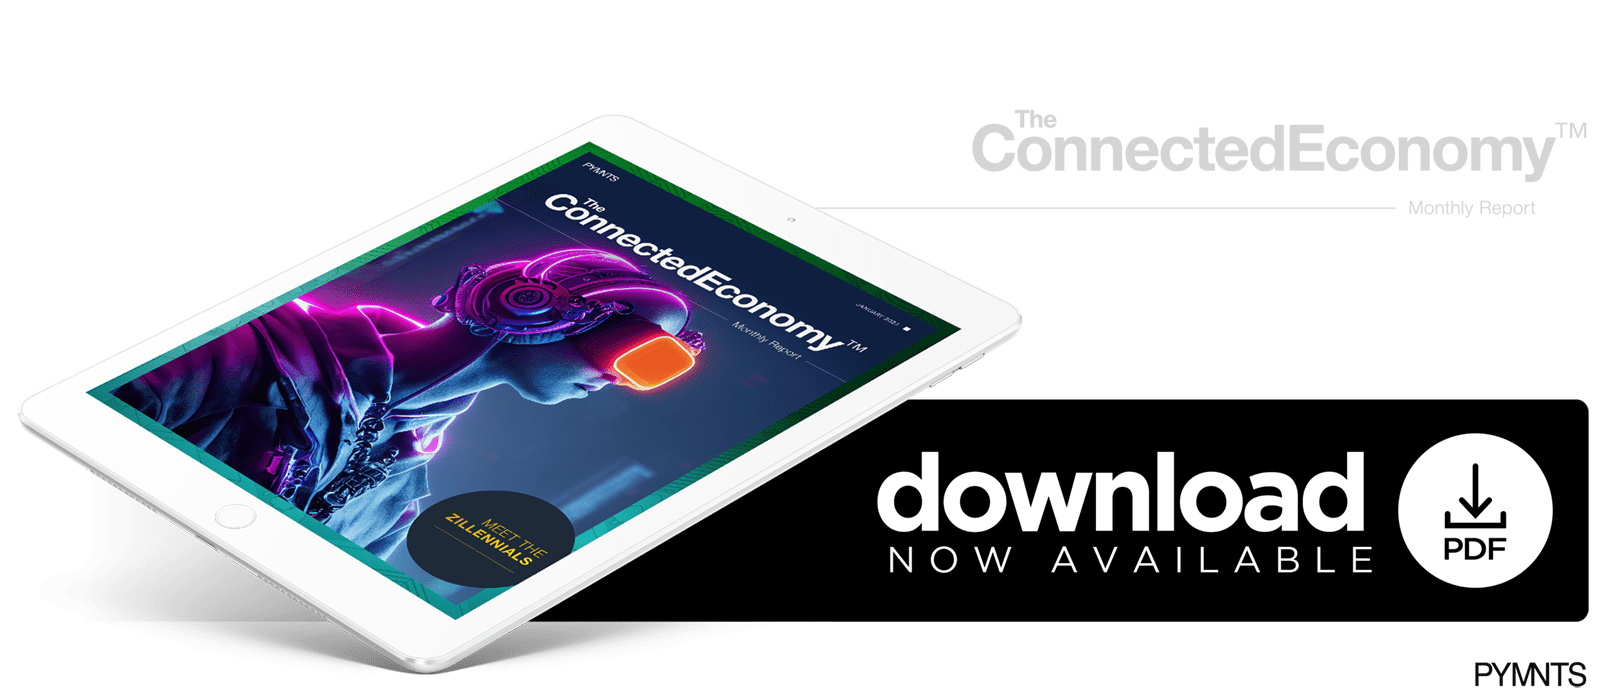 PYMNTS - ConnectedEconomy™ Monthly Report: Meet The Zillennials - January - 2023 - Discover the next generation of connected consumers — who they are, what they want and what businesses must do to reach them